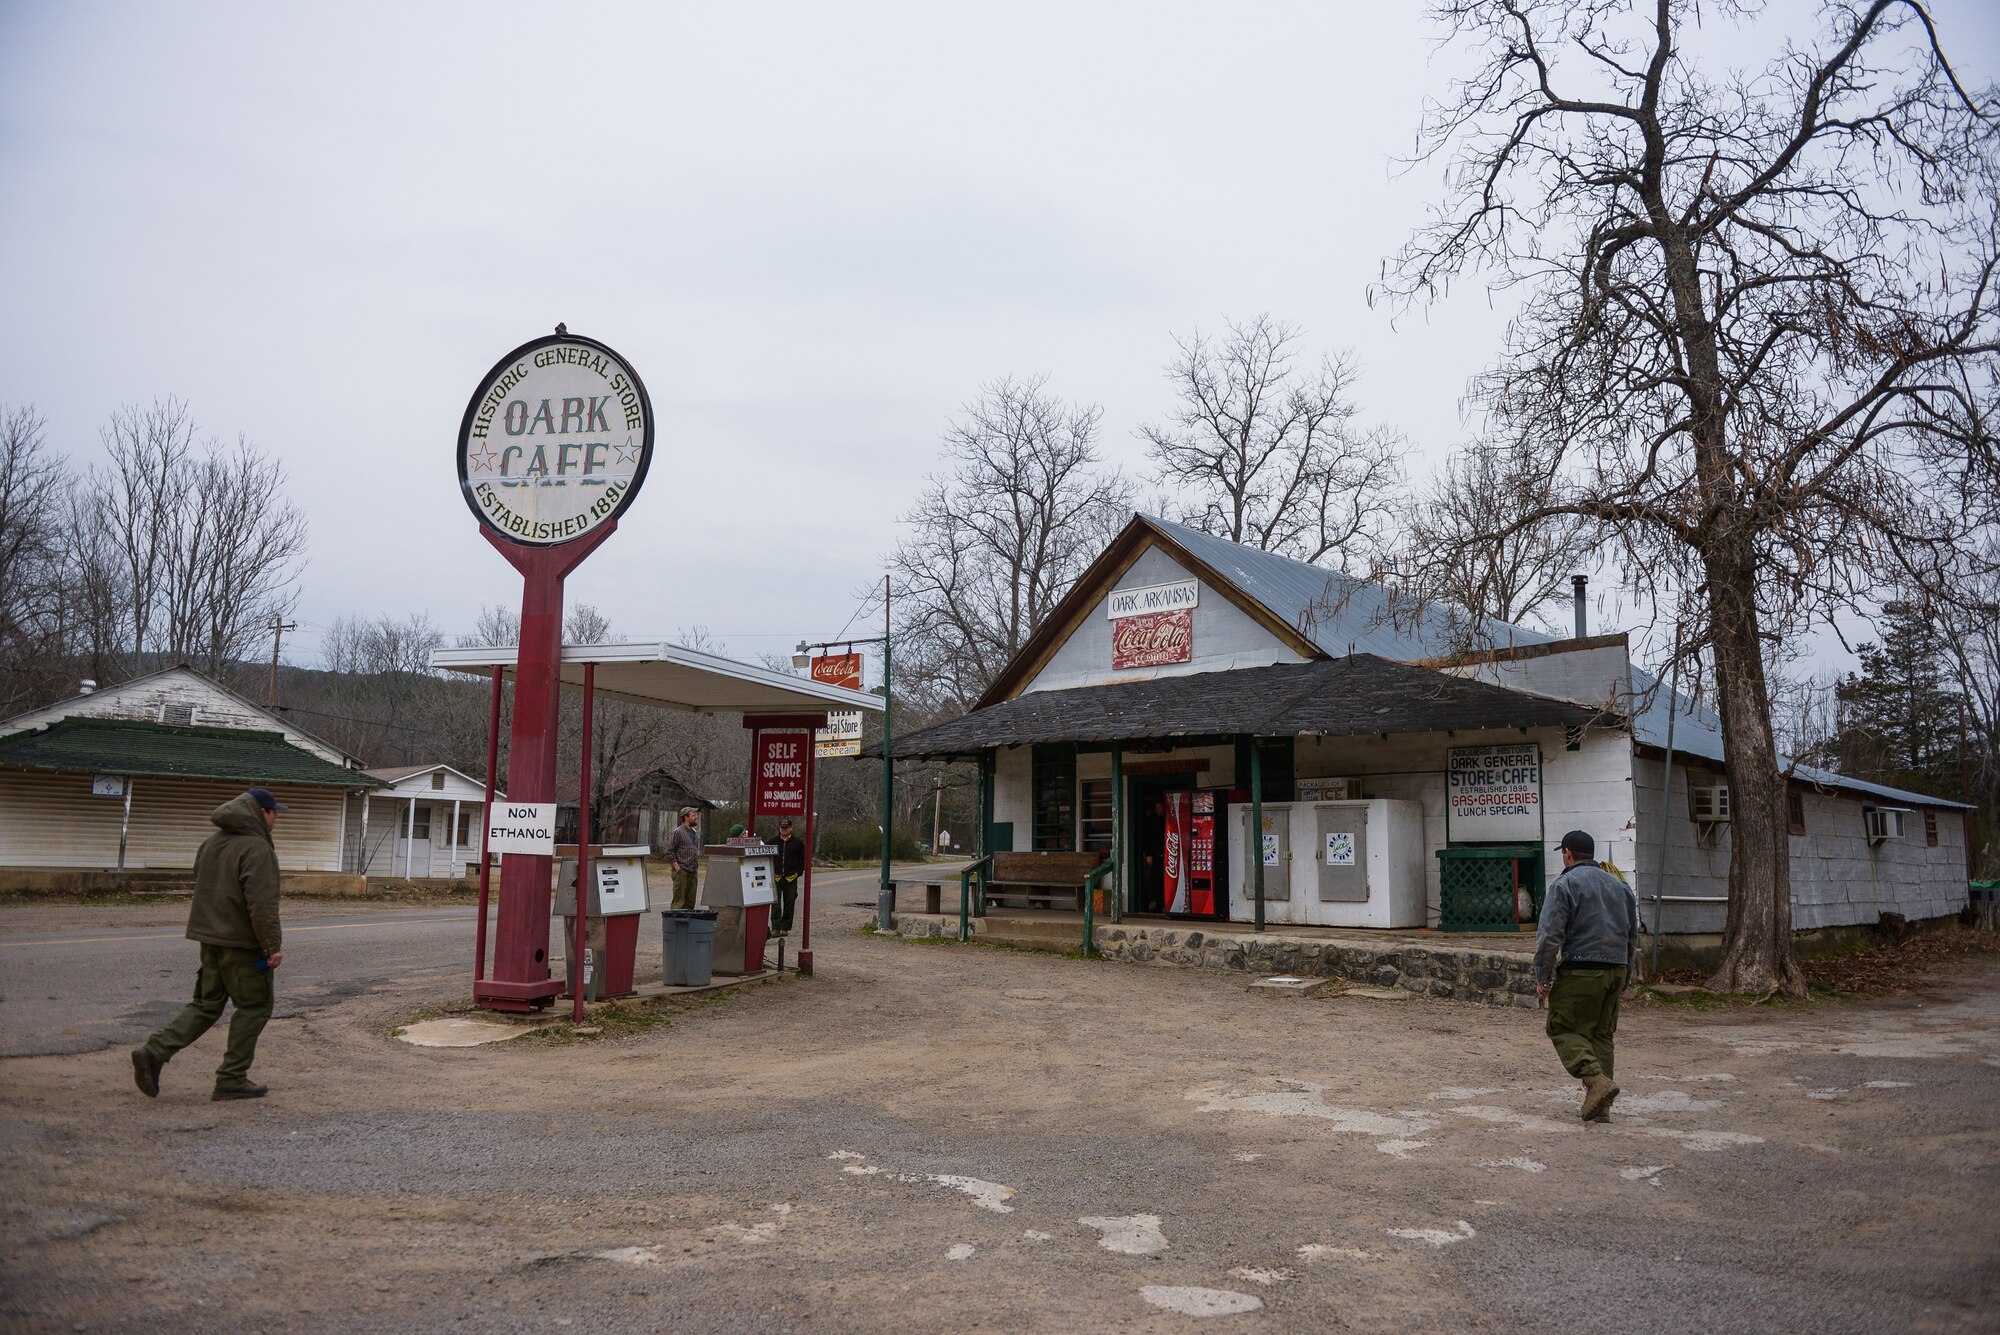 U.S. Forest Service workers walk to the Oark General Store March 8, 2013. The workers grabbed meals in the café, the oldest continually operating general store in Arkansas. 